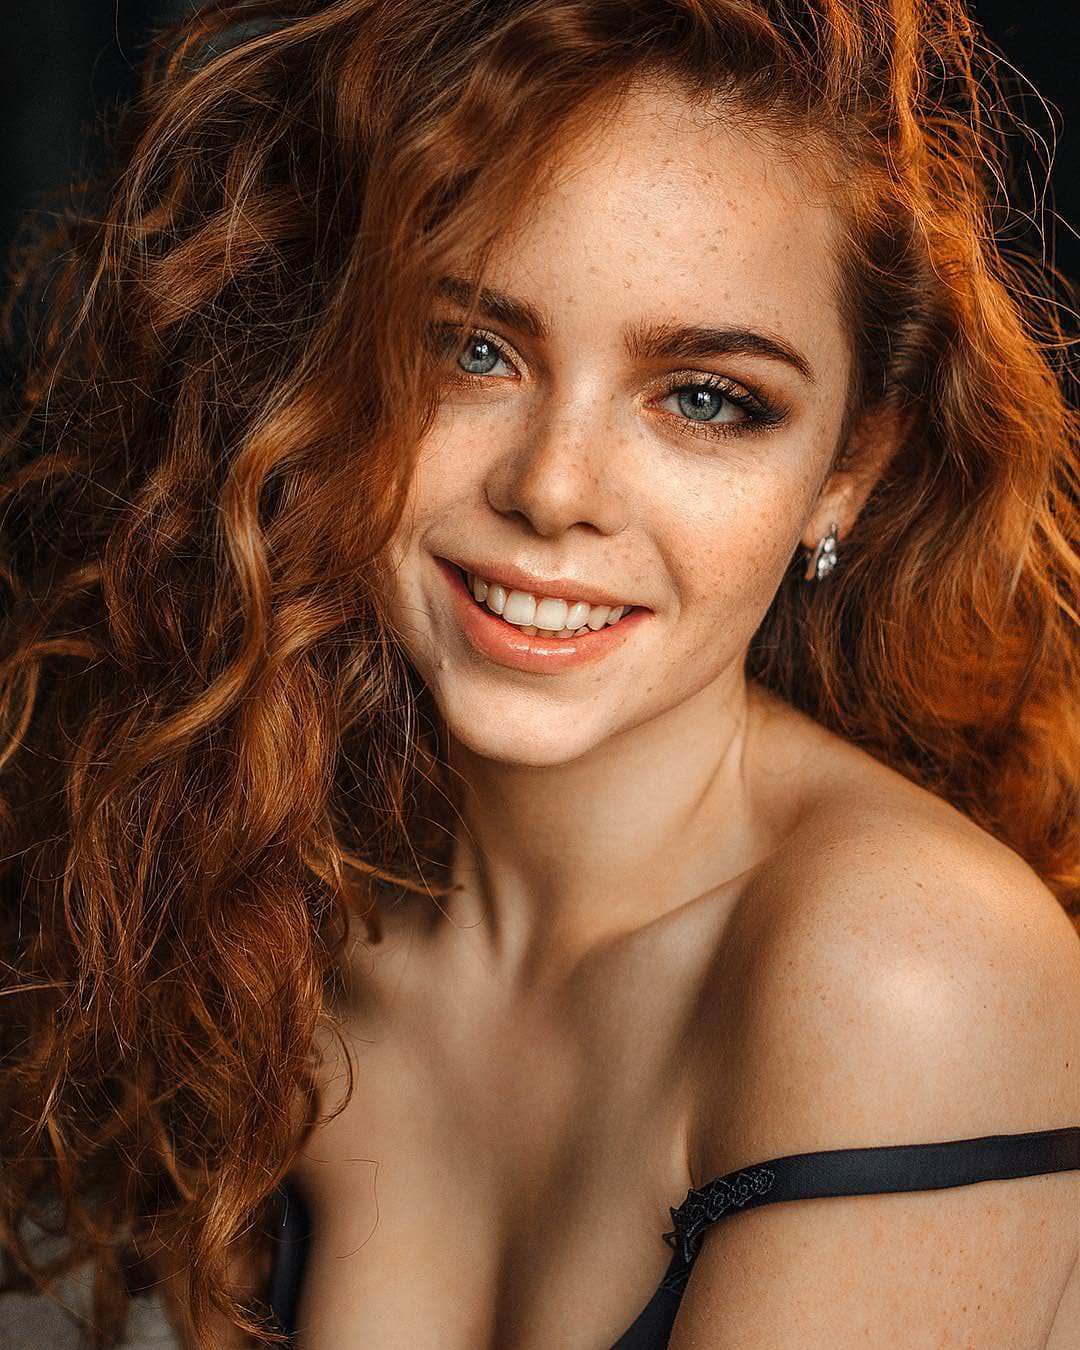 Women Model Redhead Long Hair Face Curly Hair Looking At Viewer Portrait Display Freckles Smiling Ba 1080x1350